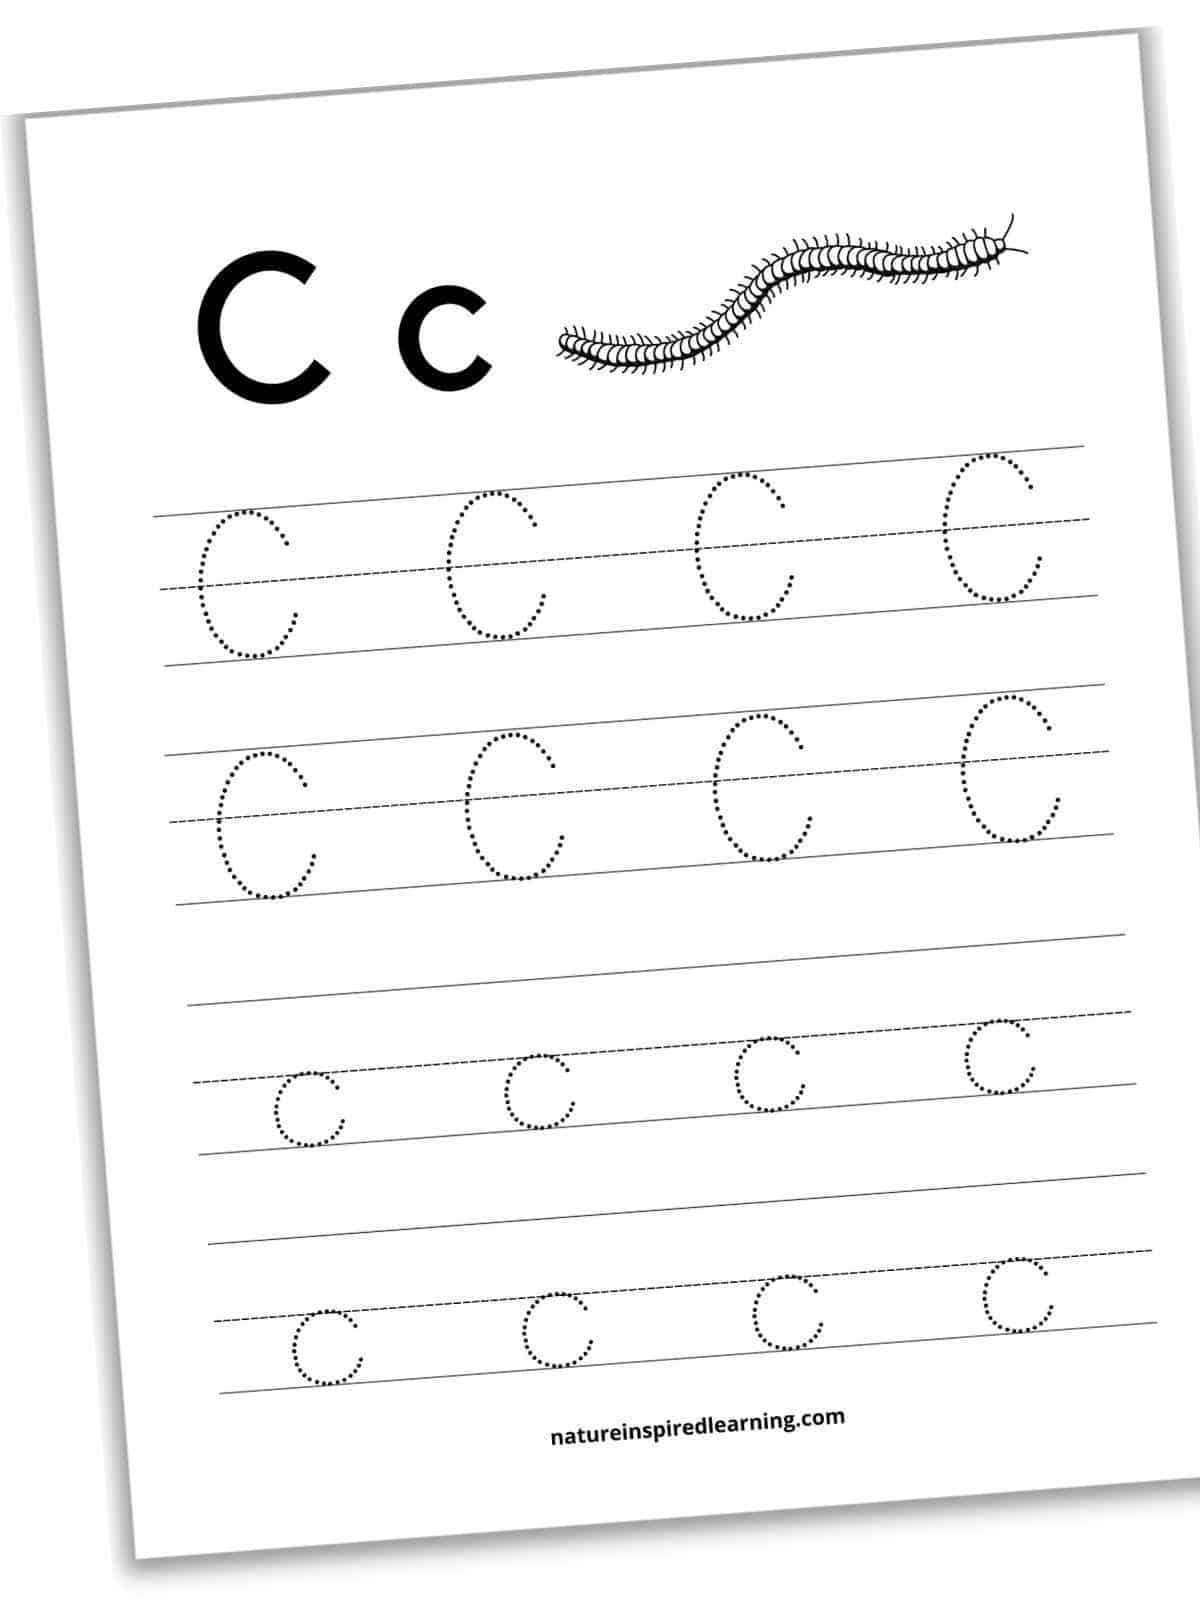 capital and lowercase letter C tracing worksheet with bold letters across the top with a black and white image of a centipede. Two sets of lines with traceable uppercase letter C's with two sets of lines with traceable lowercase letter c's. Printable with a drop shadow slanted.